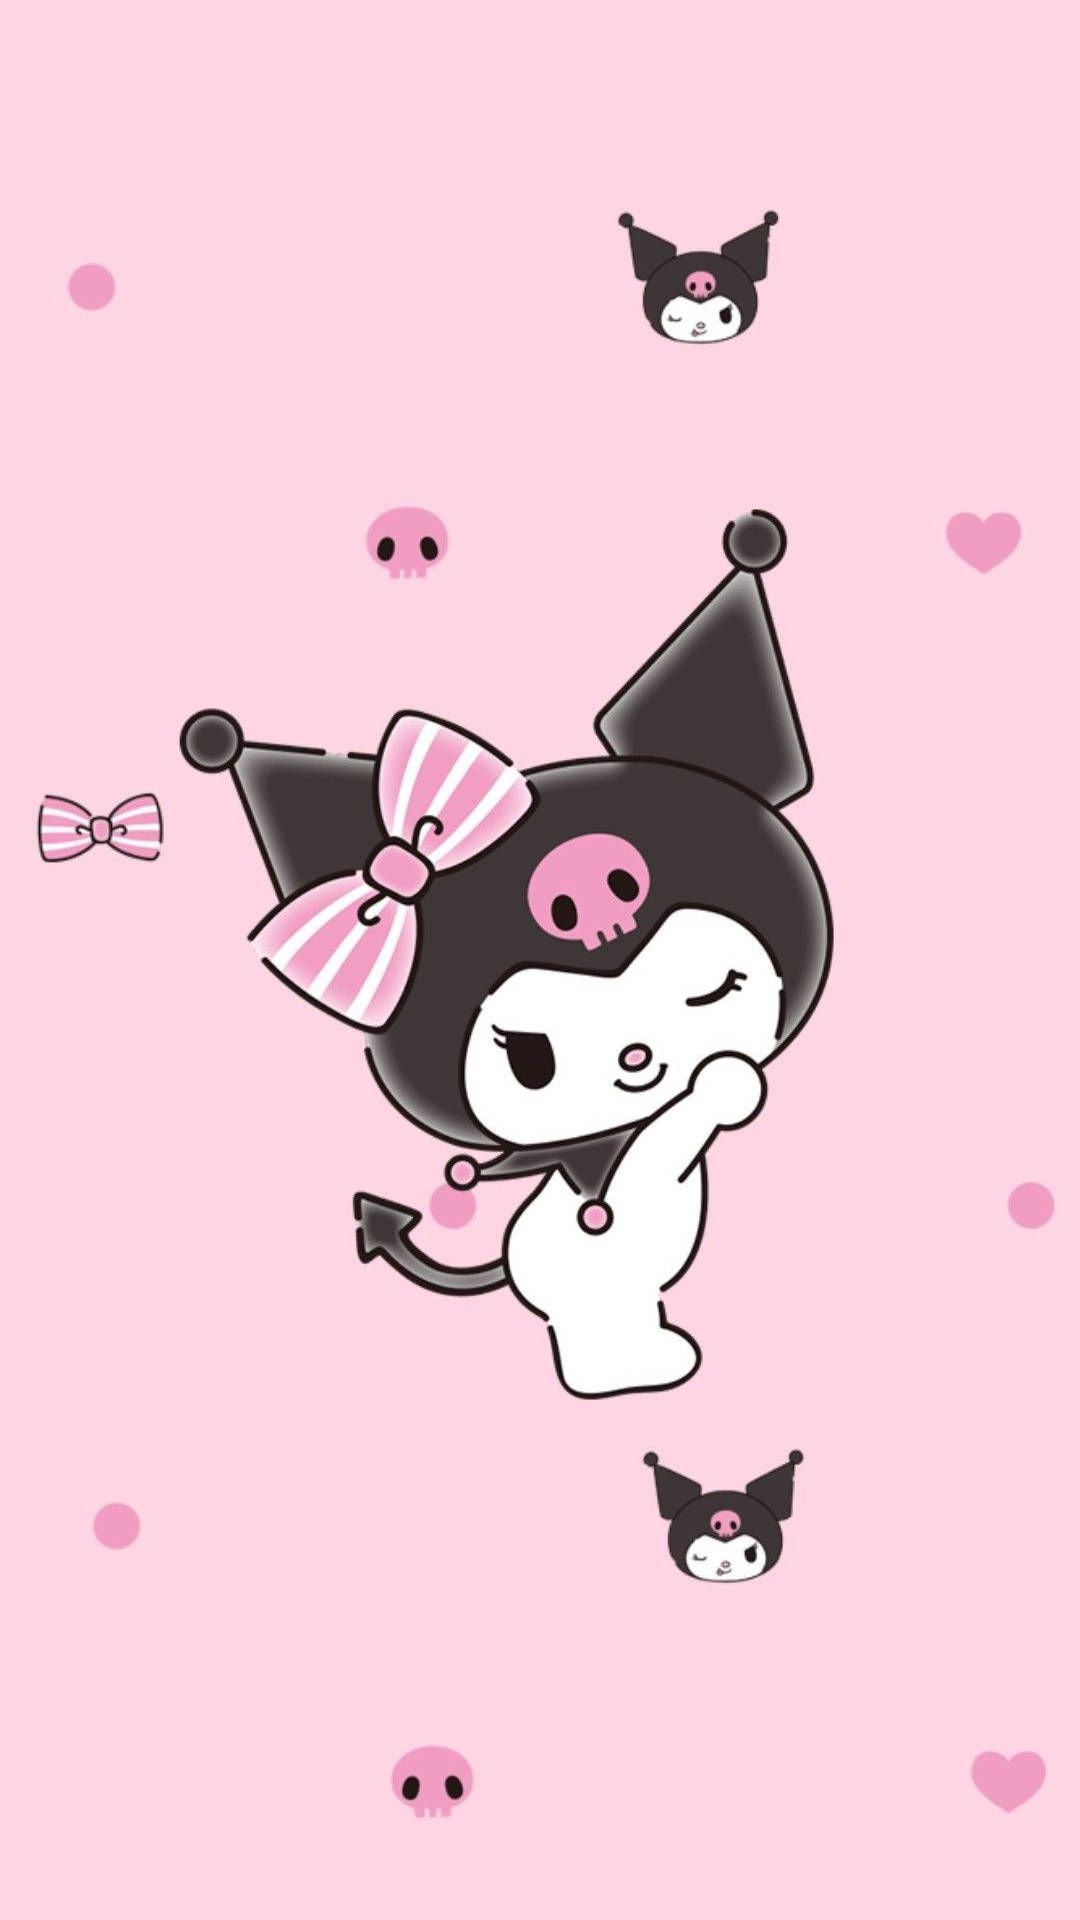 A cute pink and black cat with bows on it - Kuromi